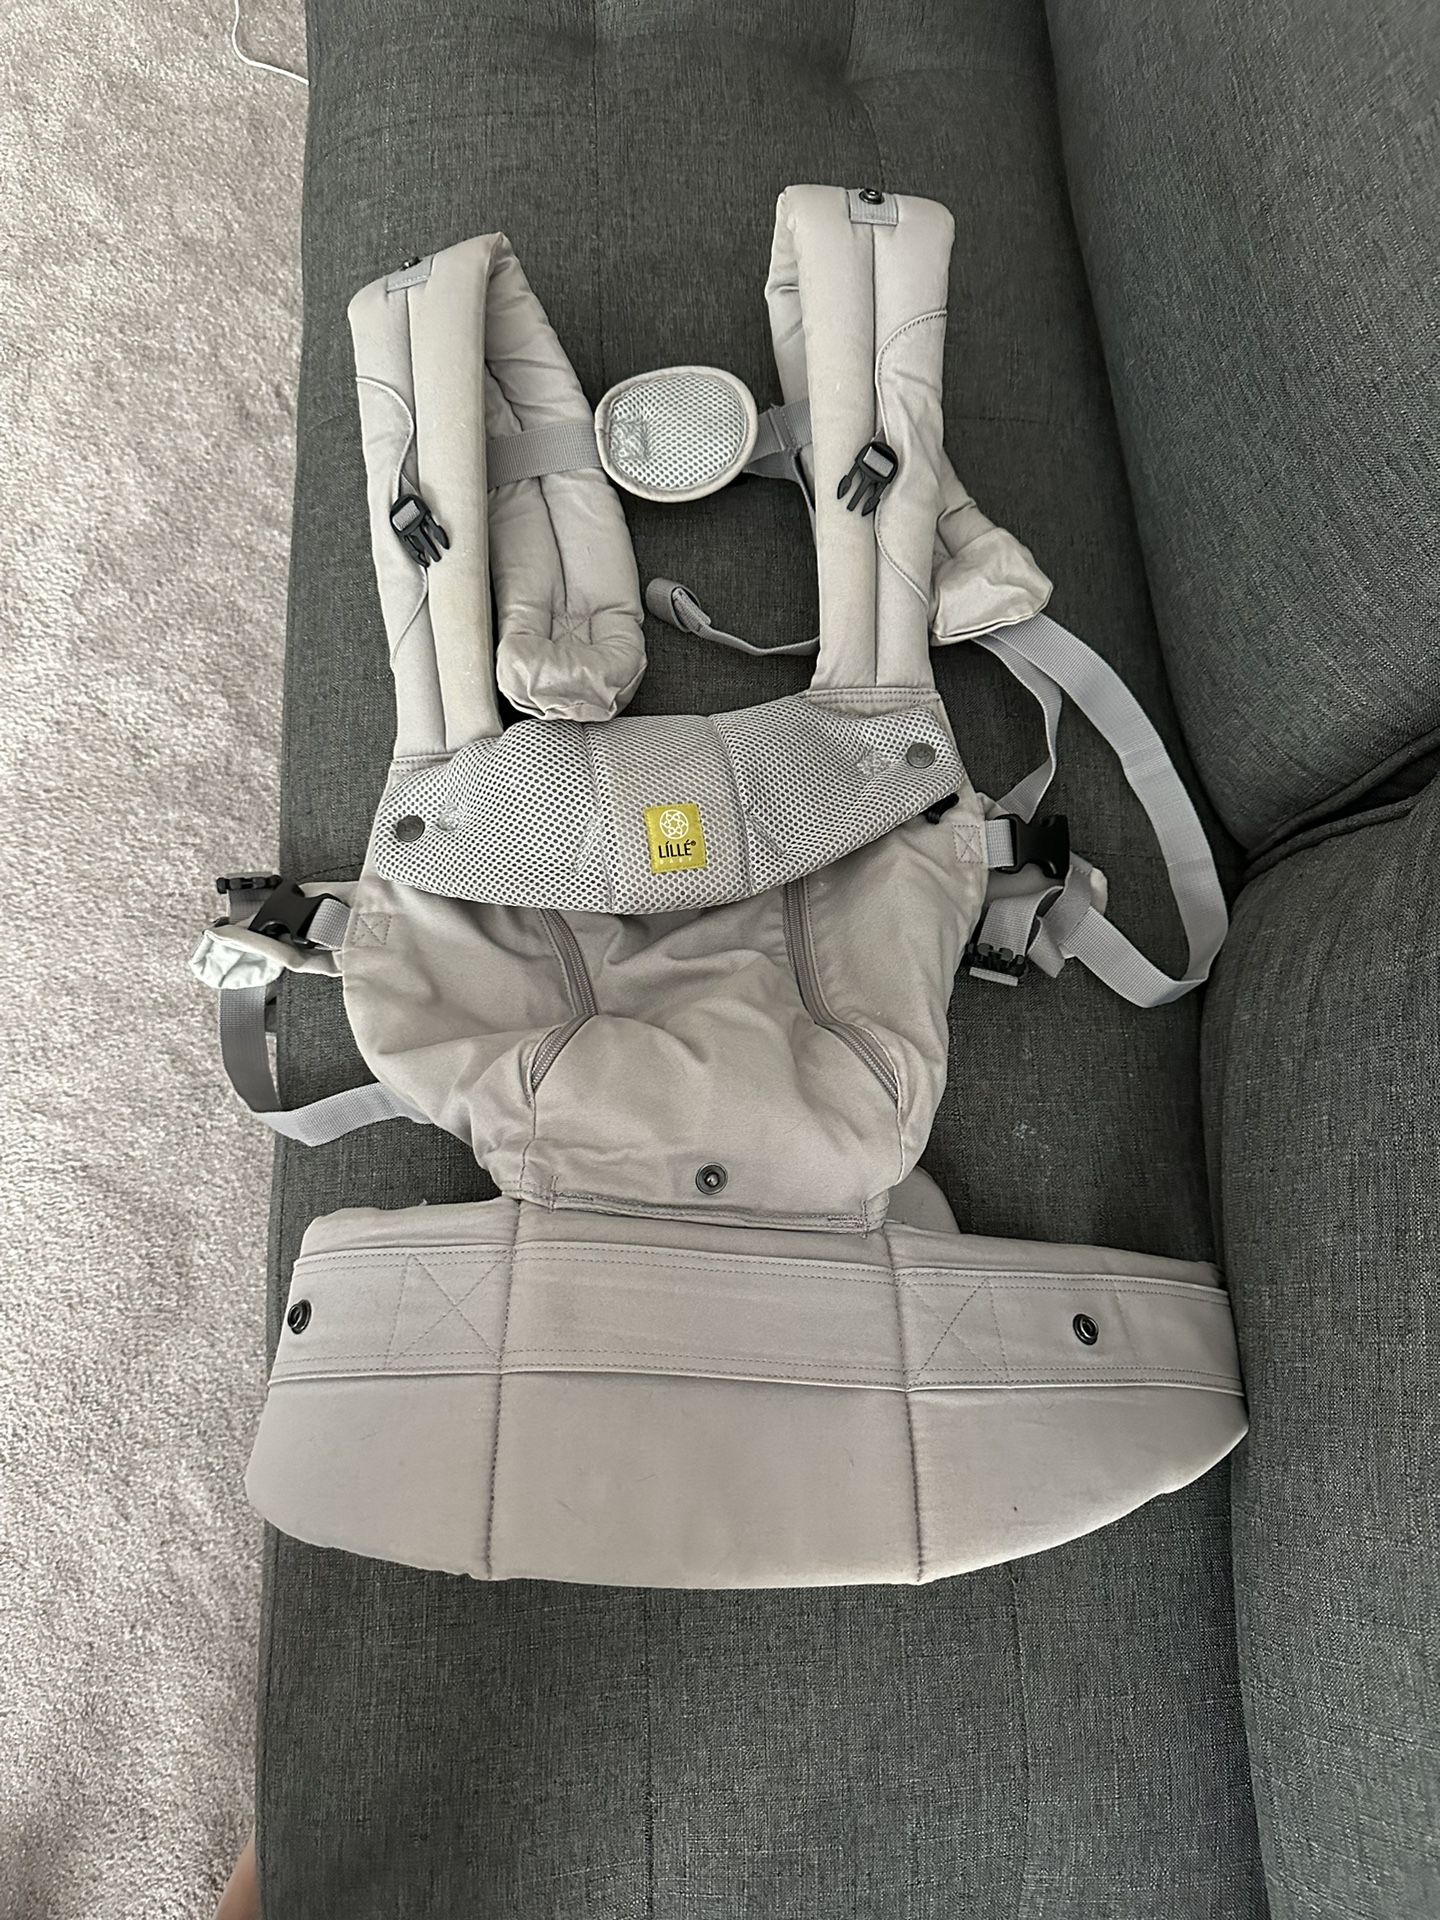 LilleBaby Carrier Complete